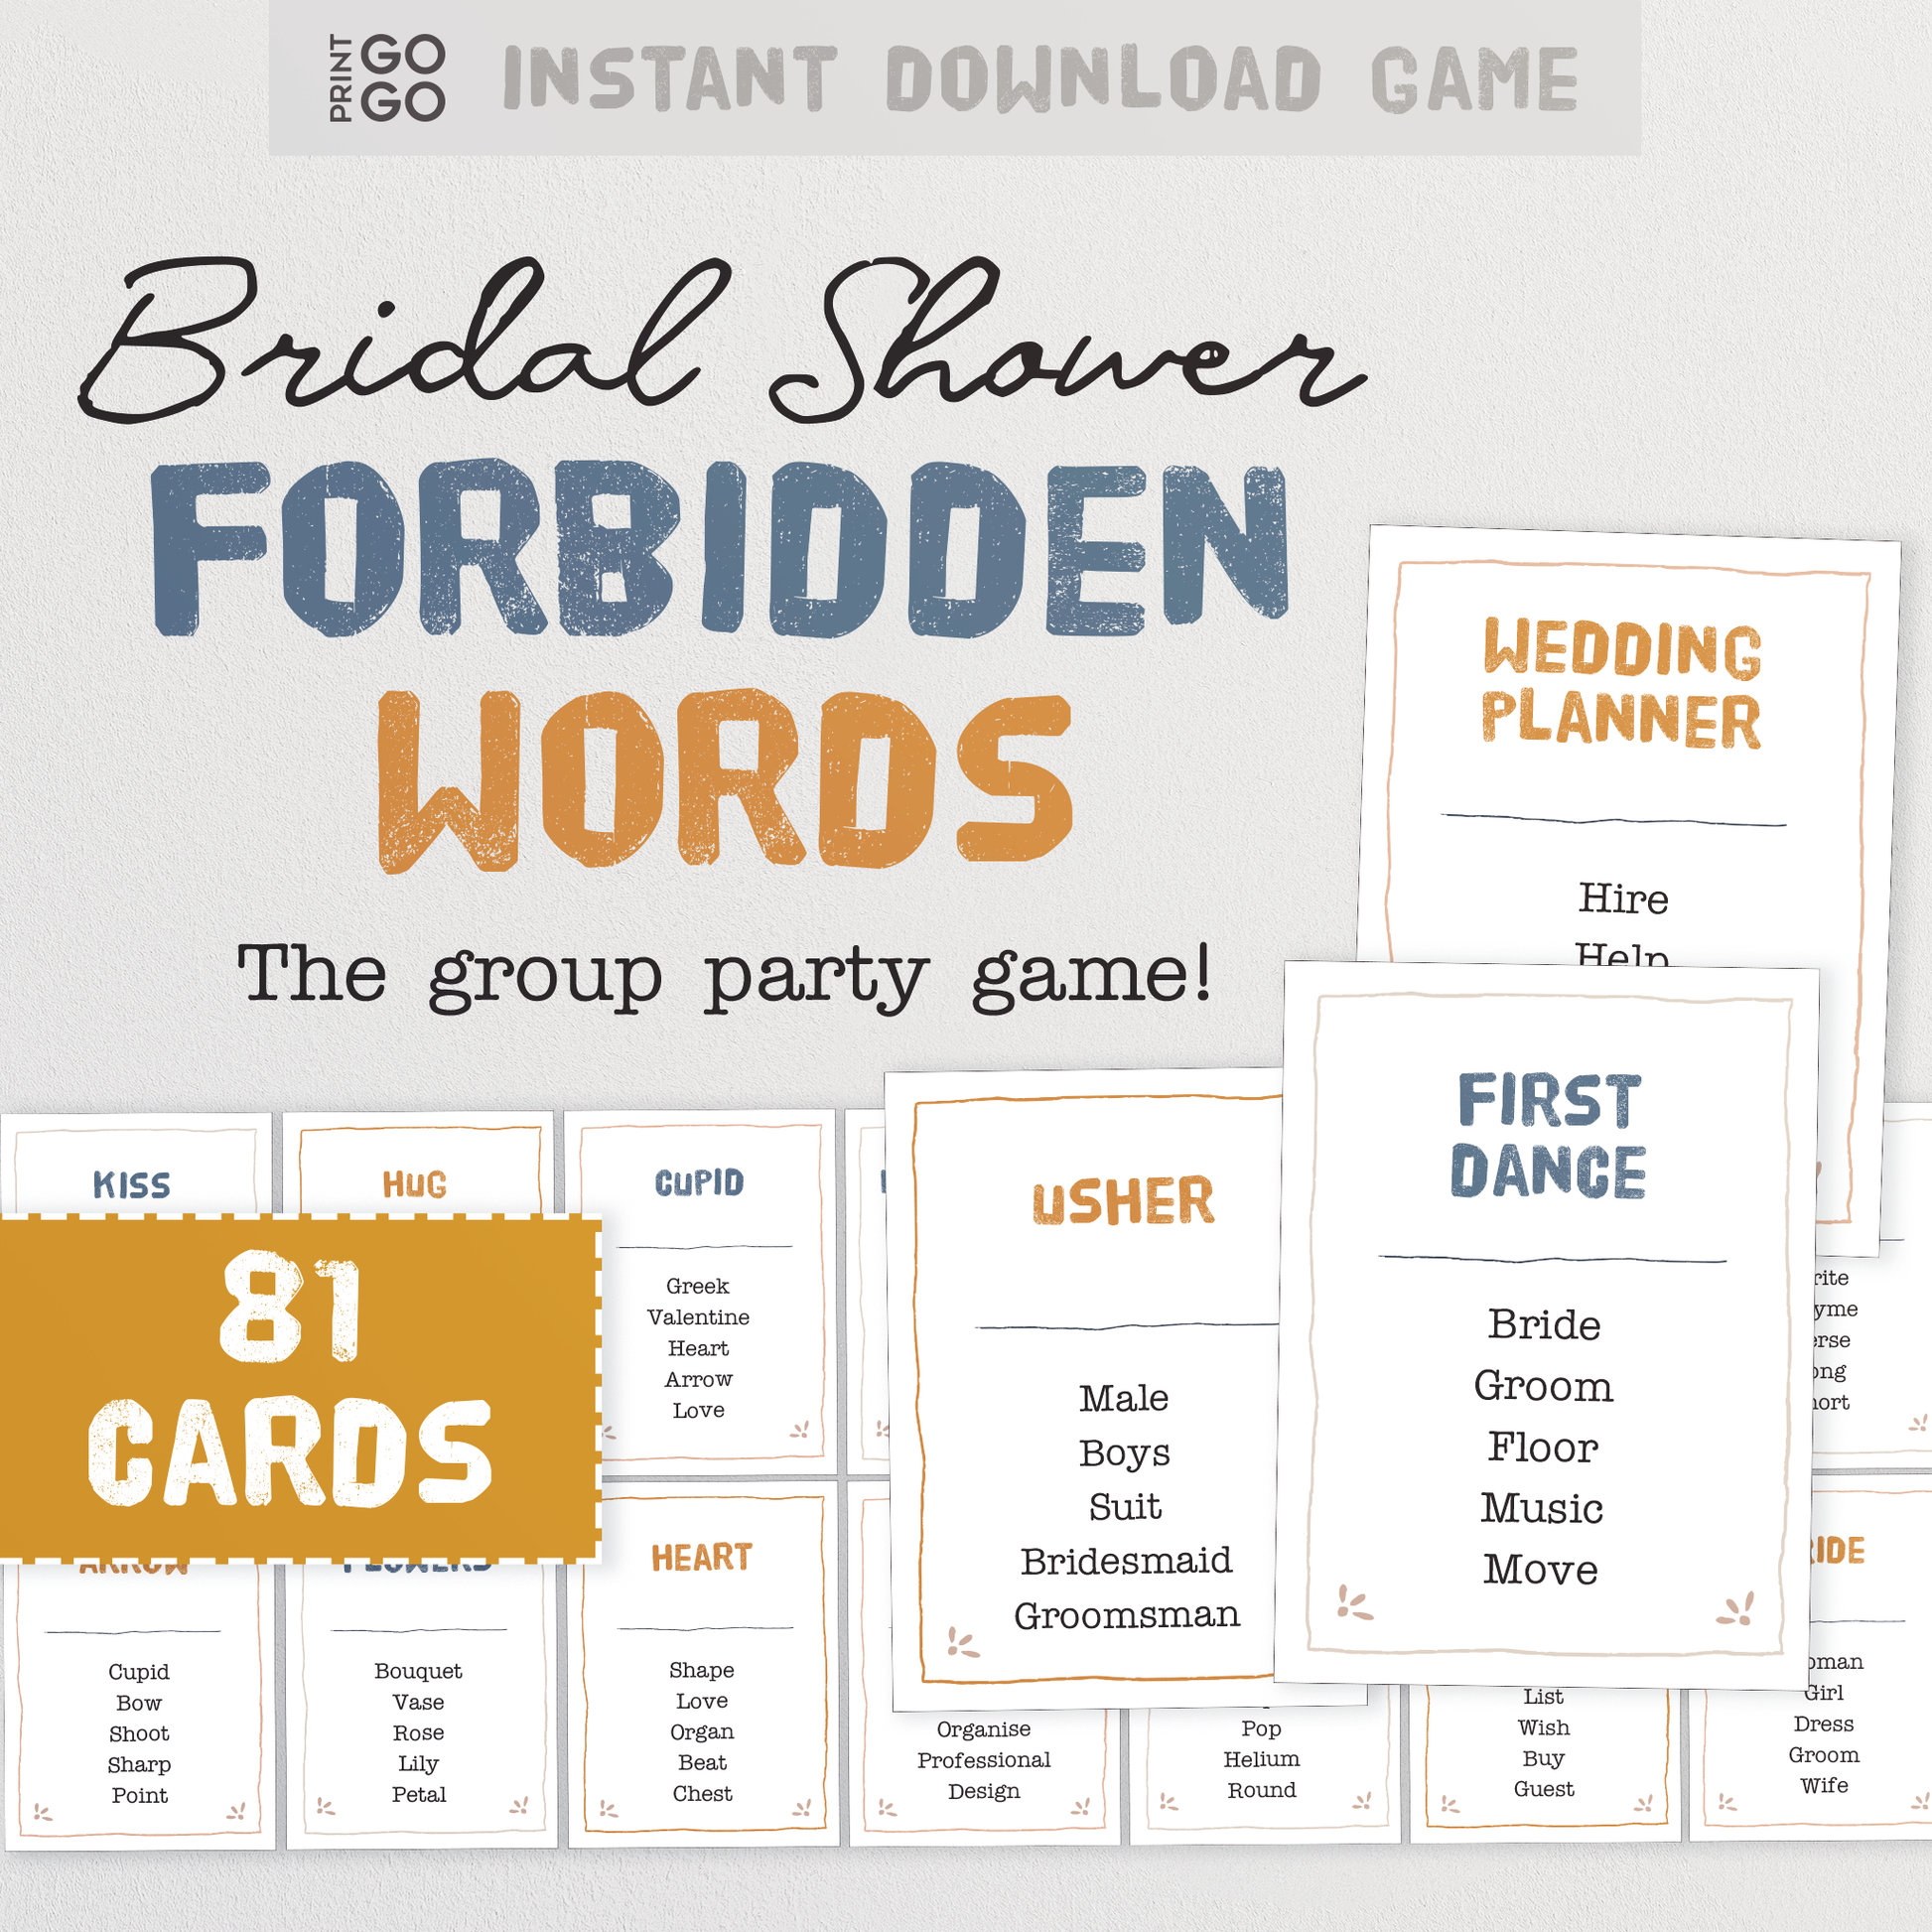 Bridal Shower Forbidden Words - The Hilarious Party Game for Groups